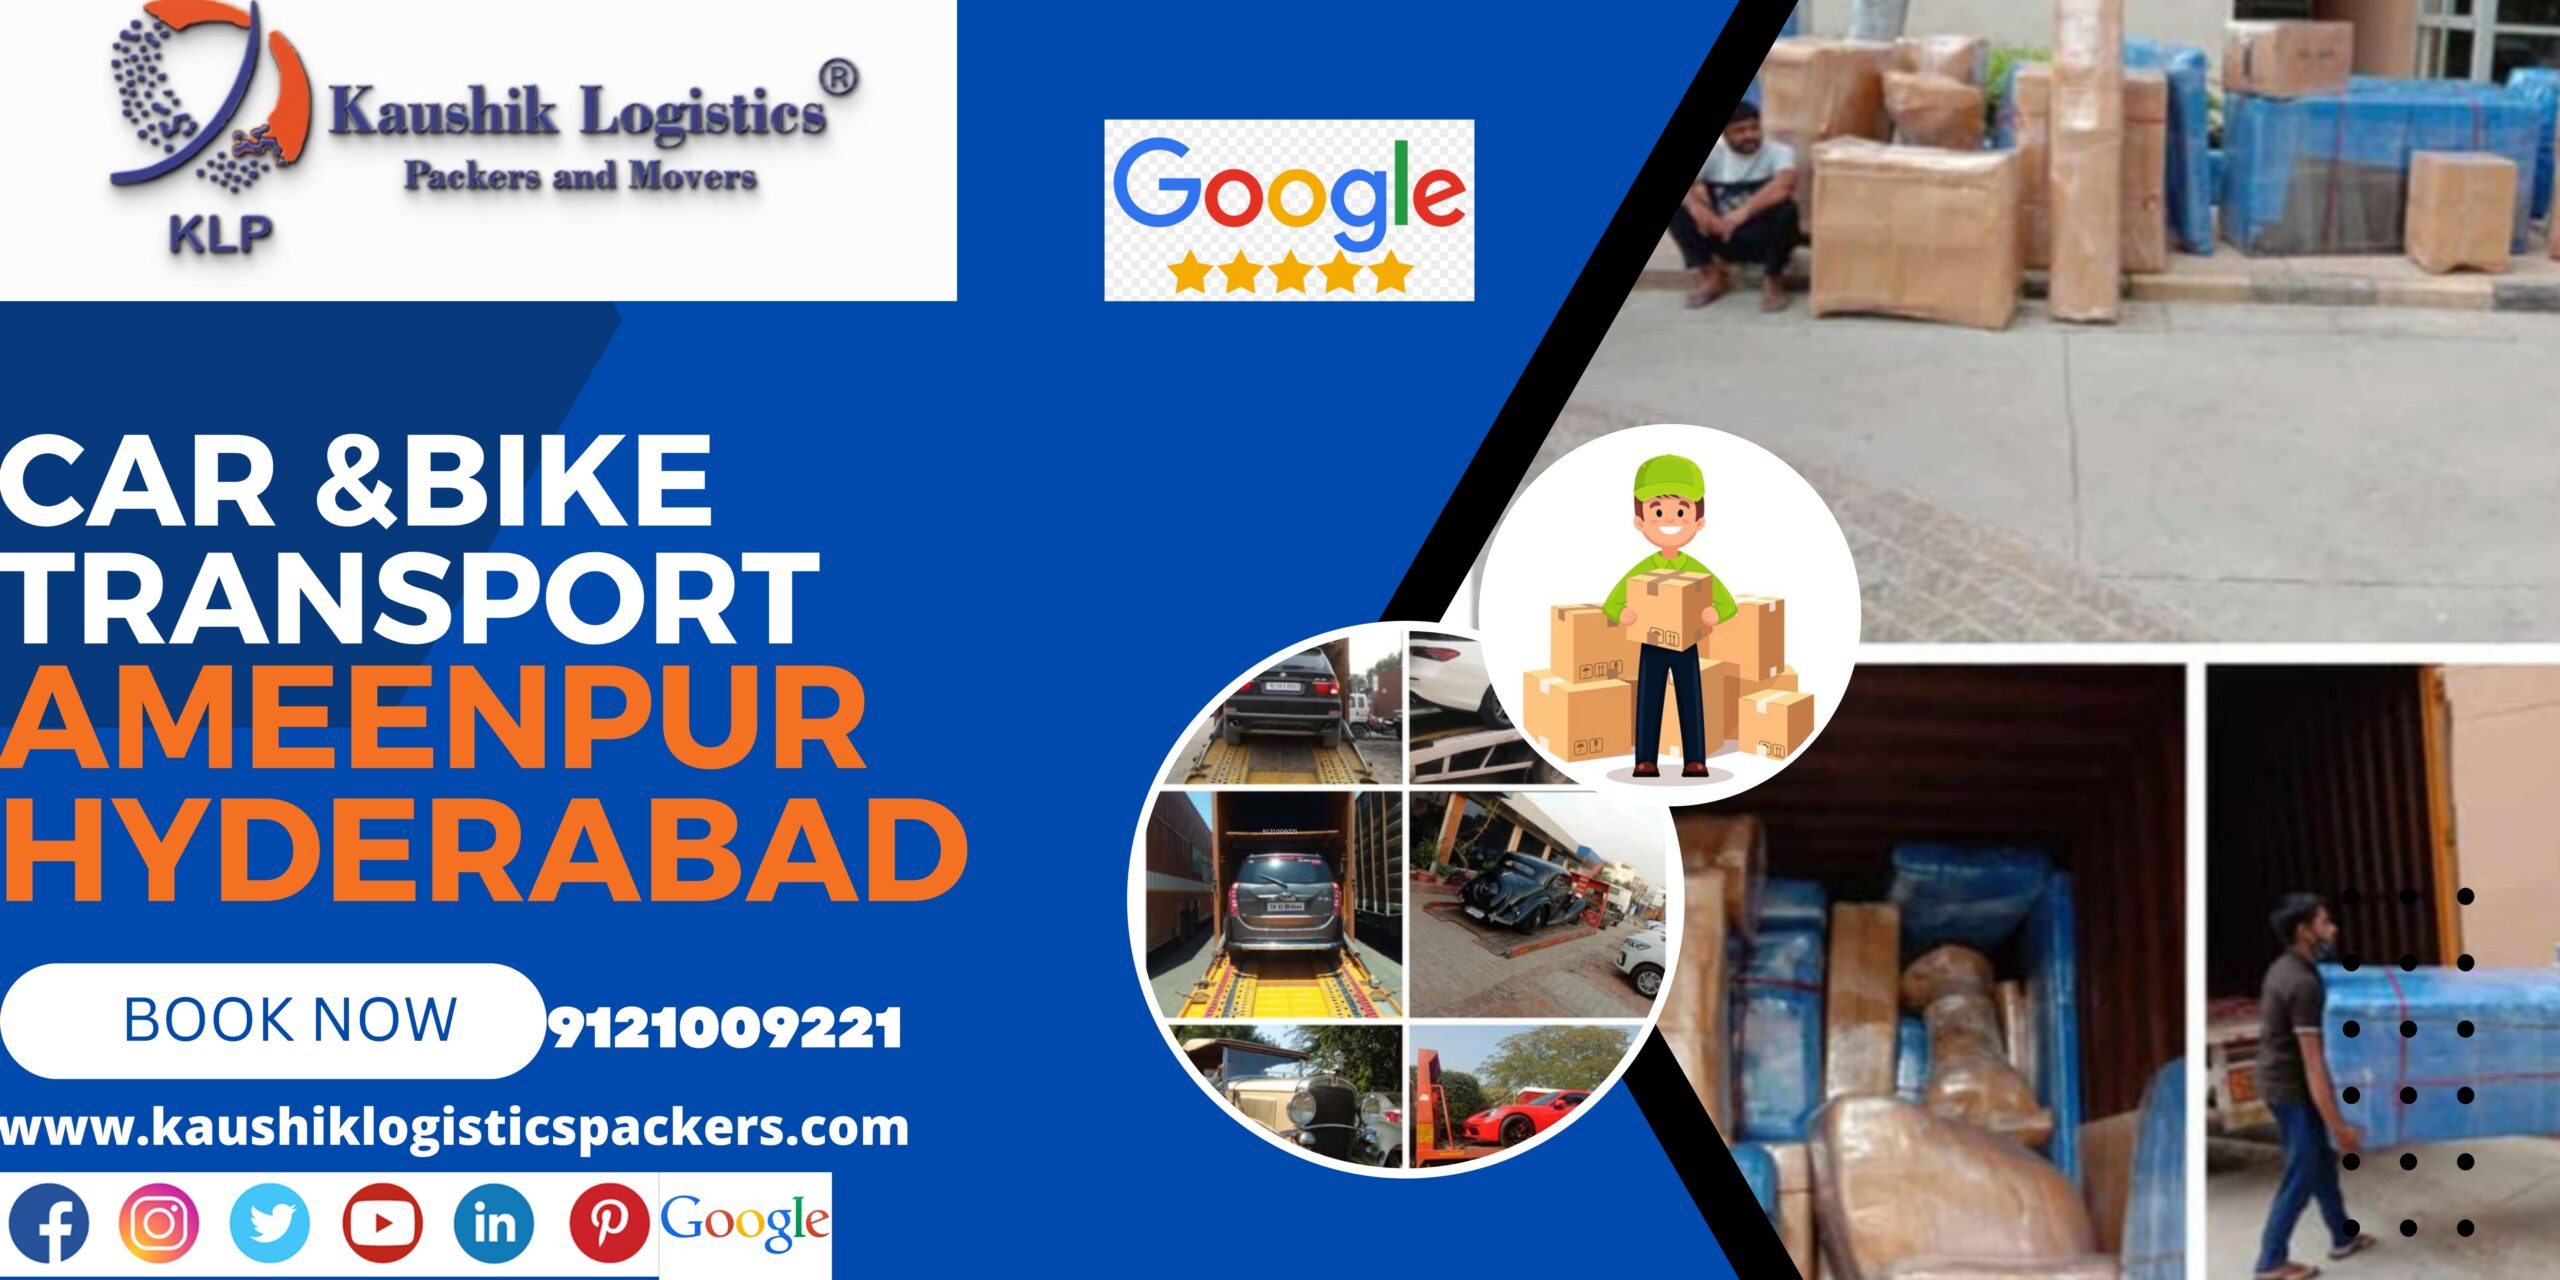 Packers and Movers In Ameenpur